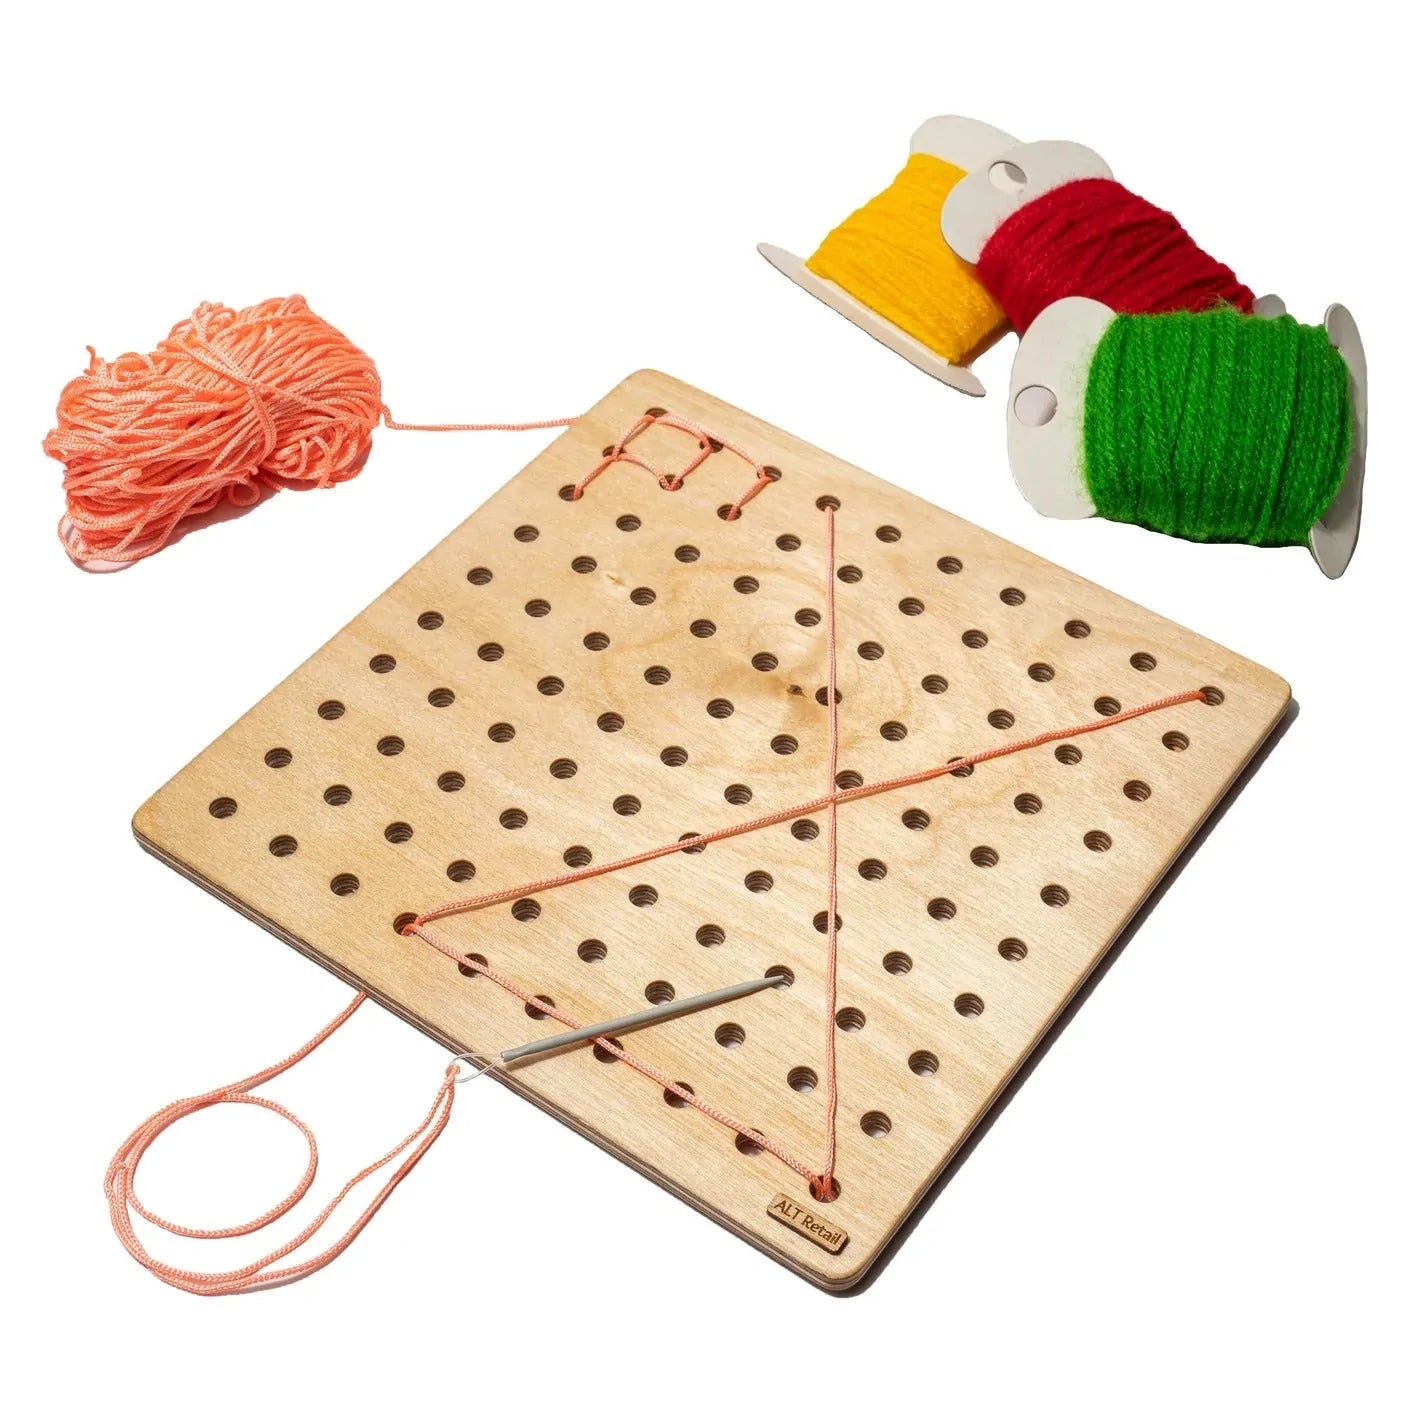 Buy Children's Sewing/Lacing Wooden Board - SkilloToys.com